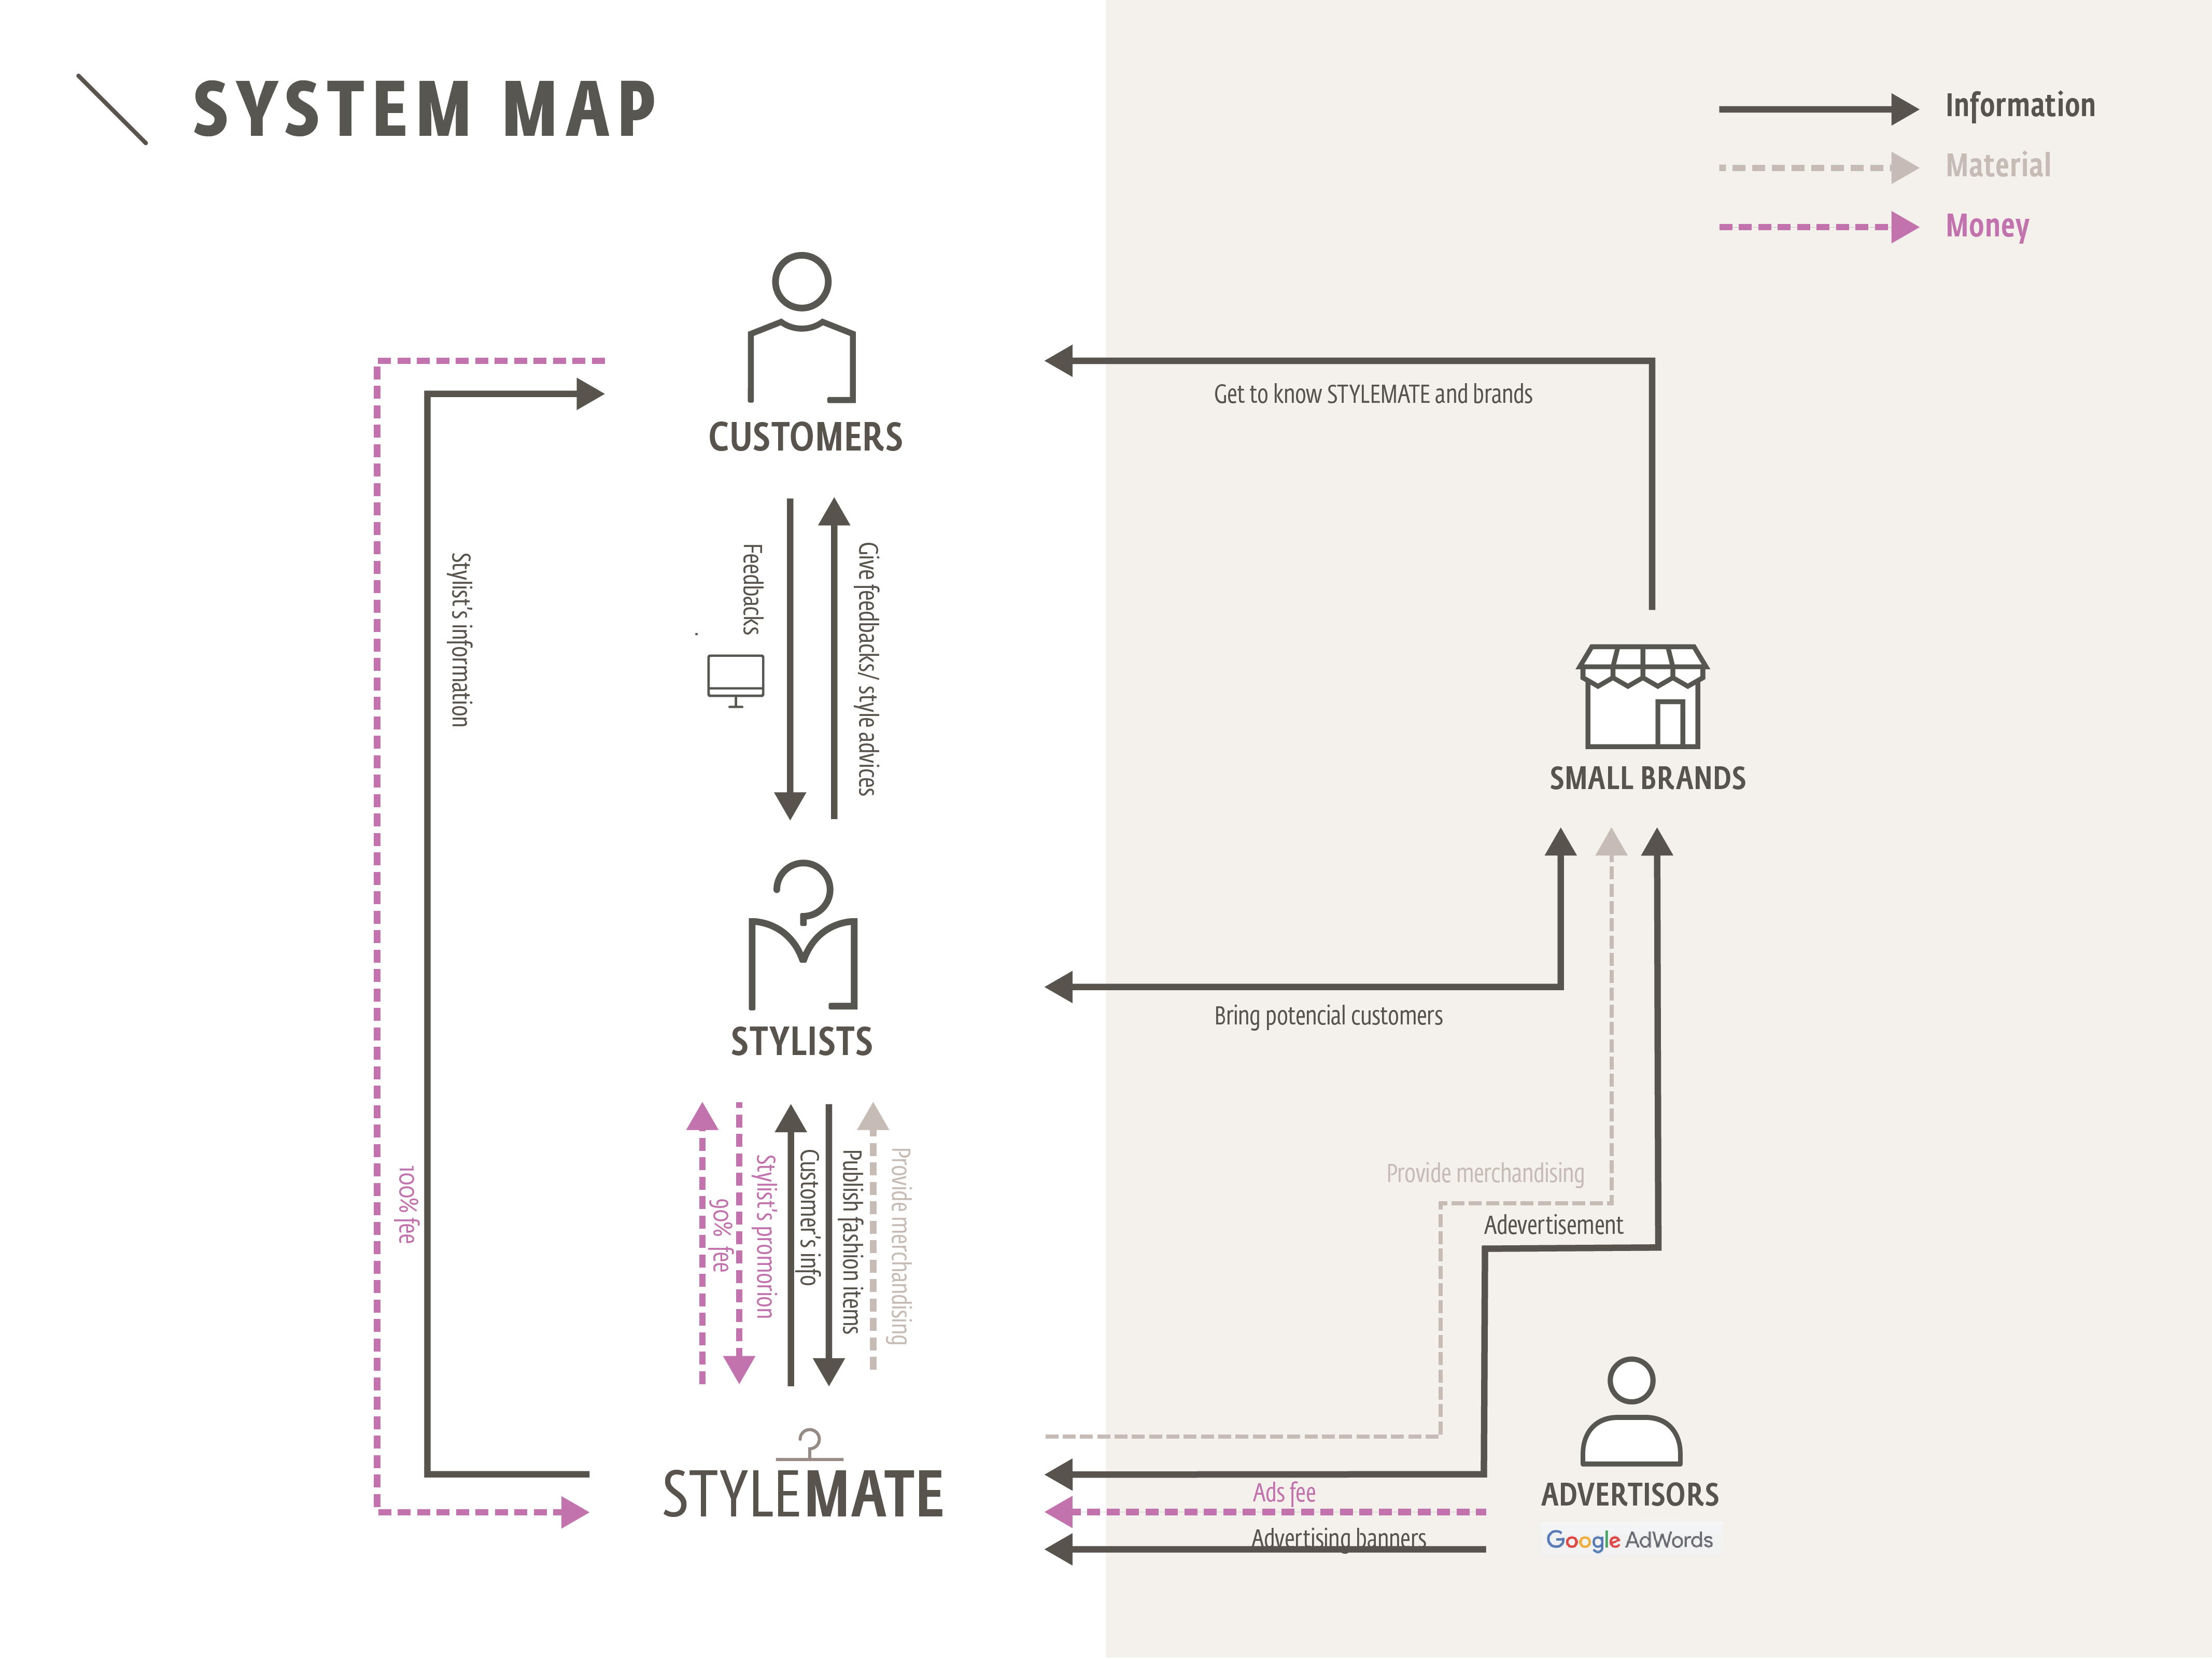 PRESENTATION STYLEMATE 28th jan_all togheter_system map